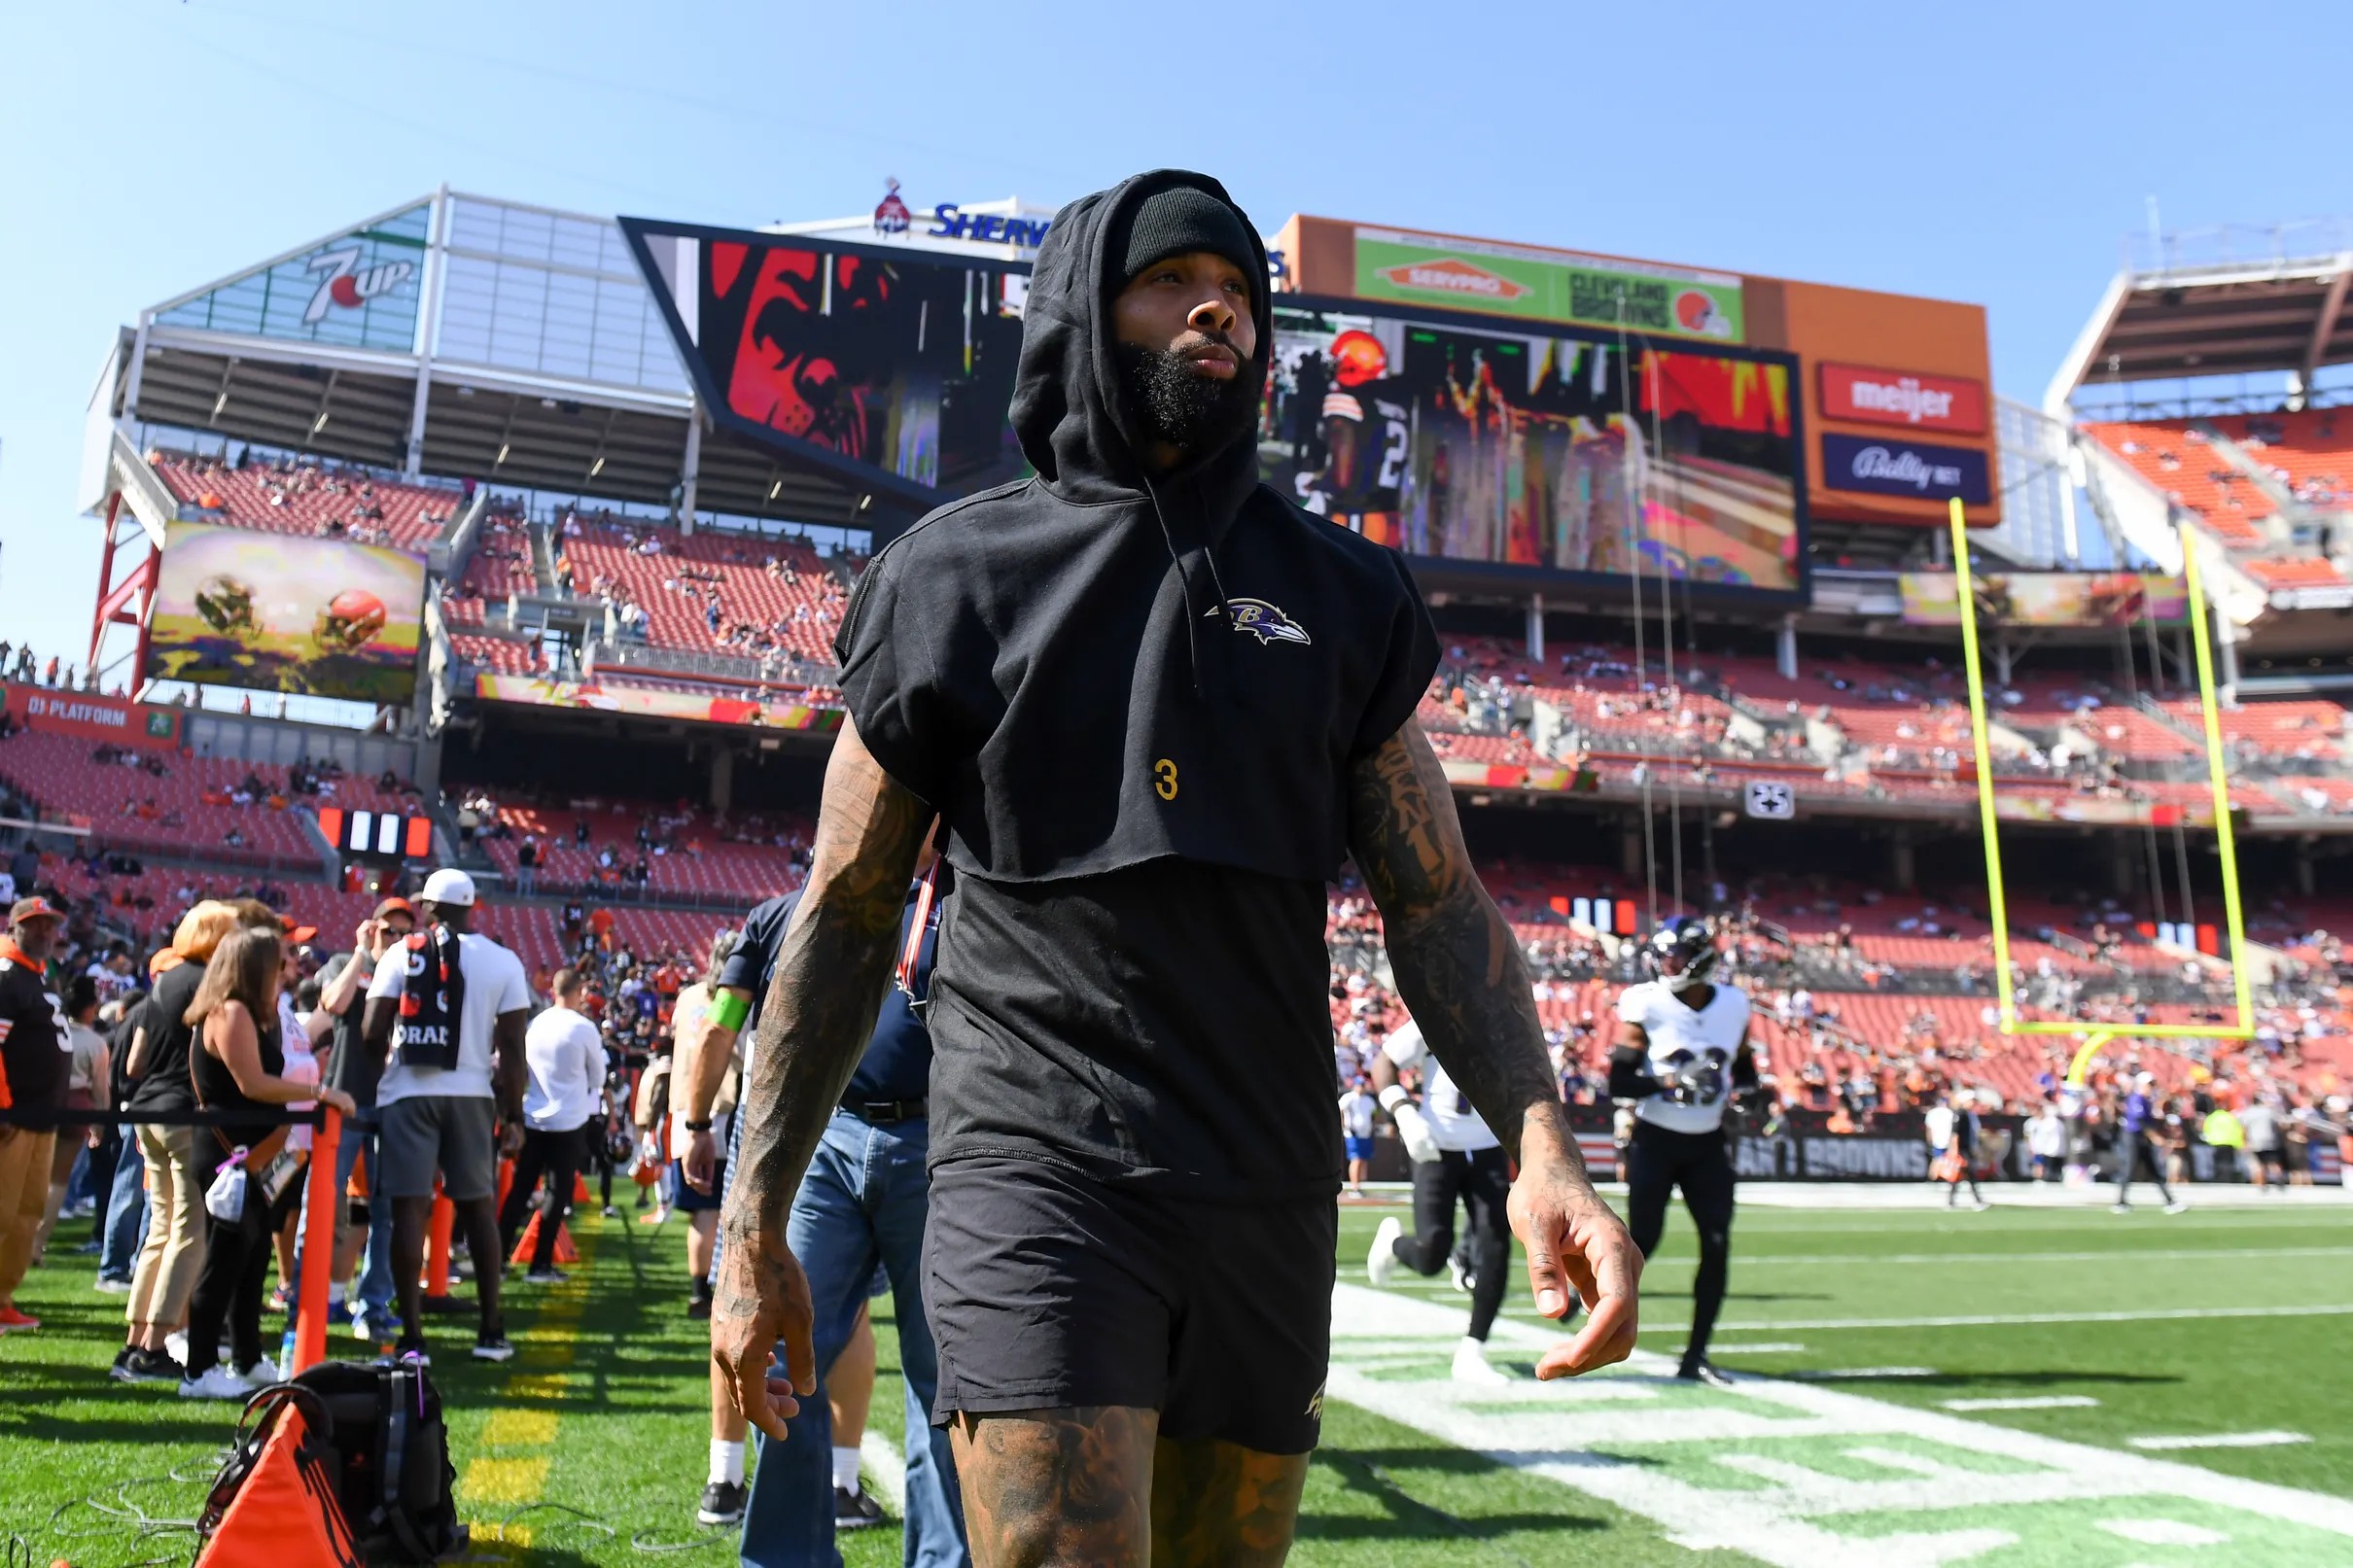 Ravens sign WR Odell Beckham Jr. to a one-year contract - Baltimore Beatdown